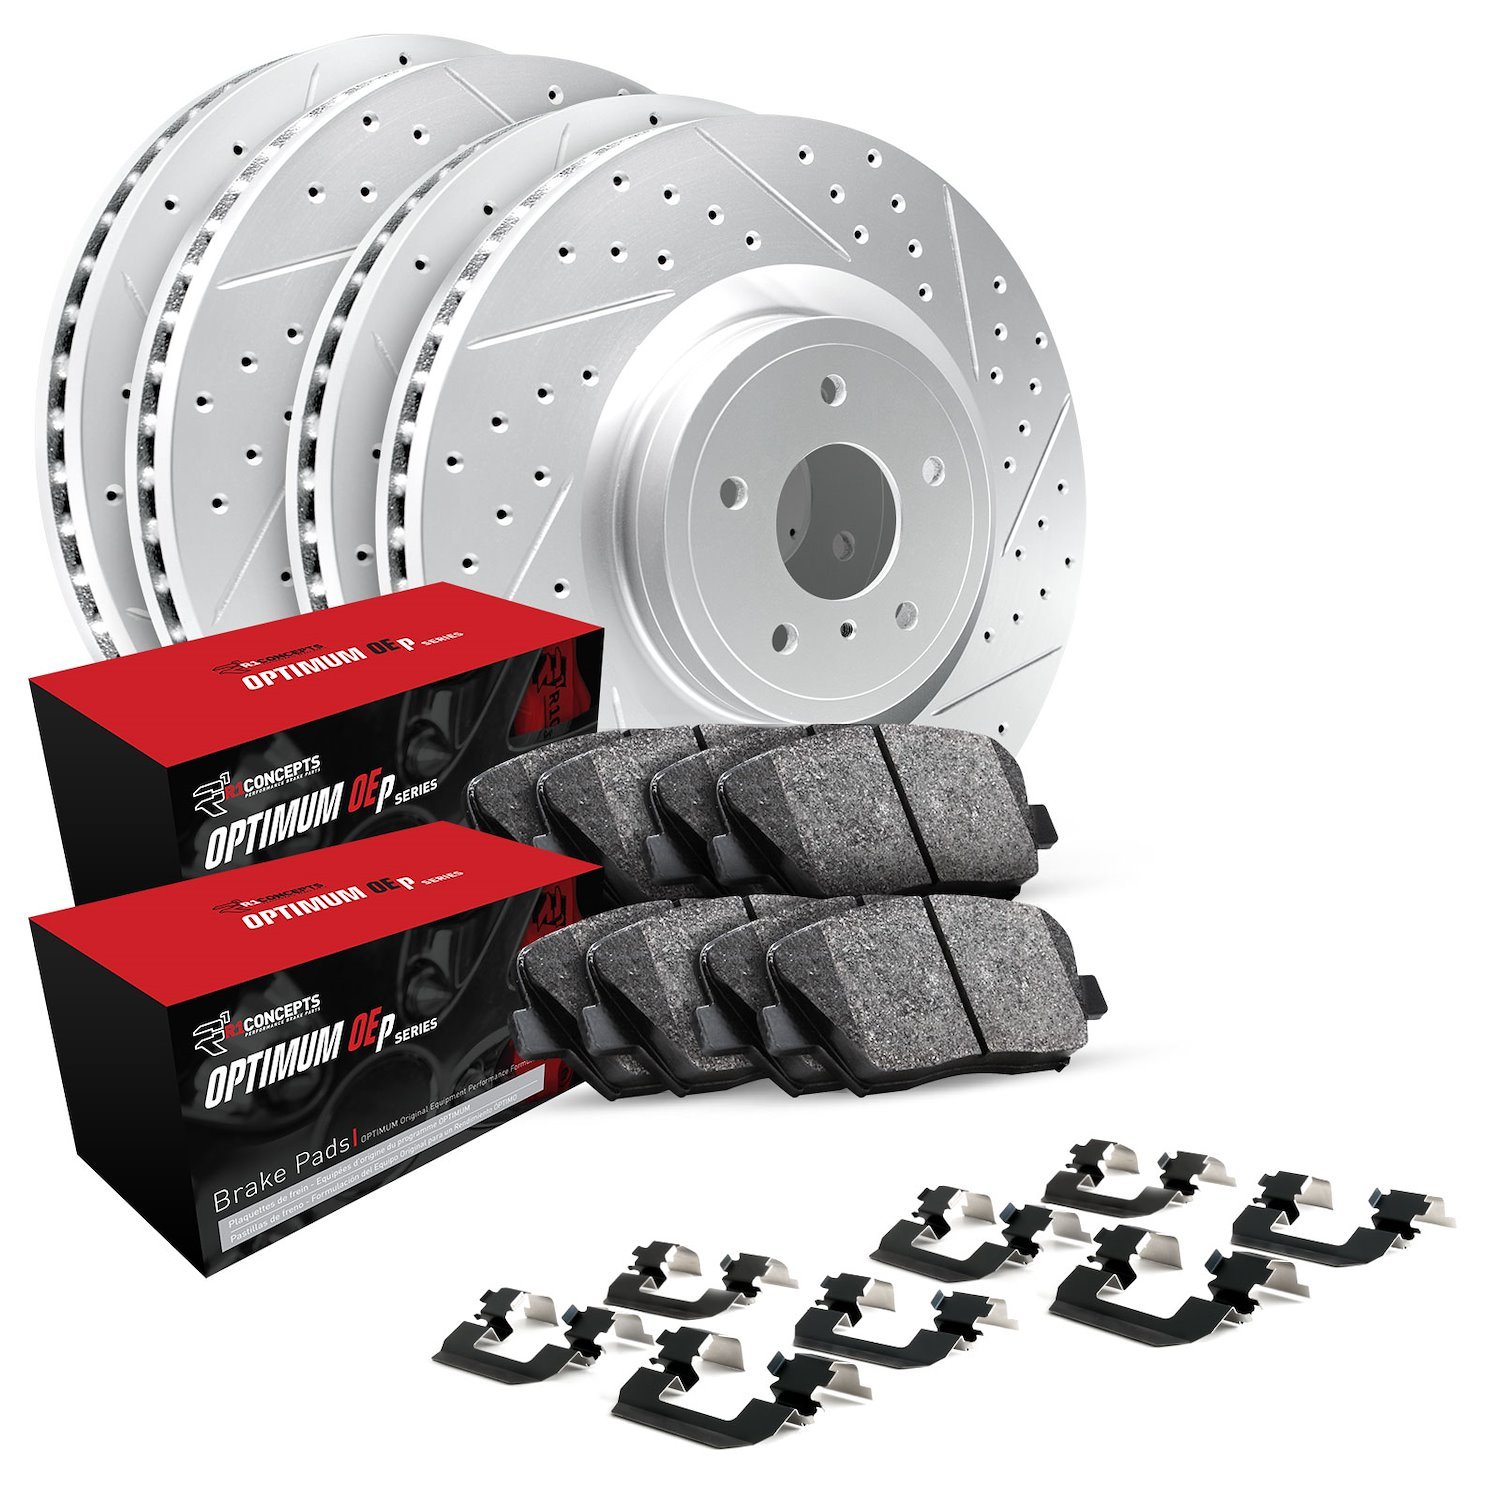 GEO-Carbon Drilled & Slotted Brake Rotor & Drum Set w/Optimum OE Pads, Shoes, & Hardware, 2003-2008 Fits Multiple Makes/Models